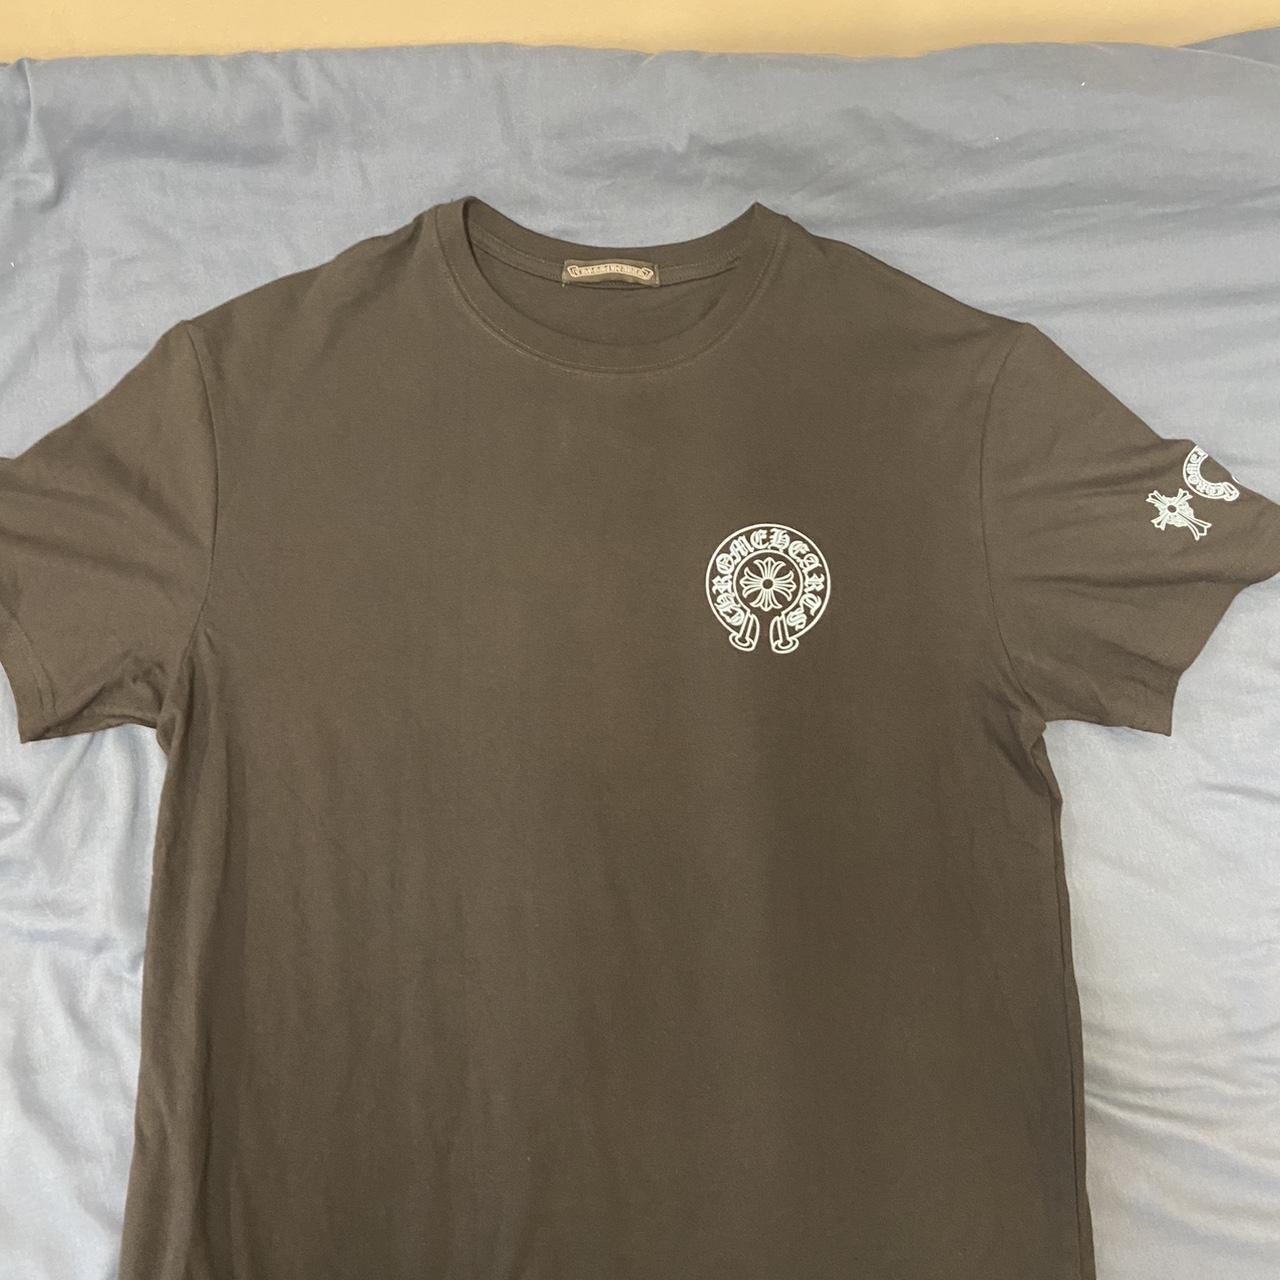 Chrome Hearts T shirt Worn it only once Can fit a Large - Depop